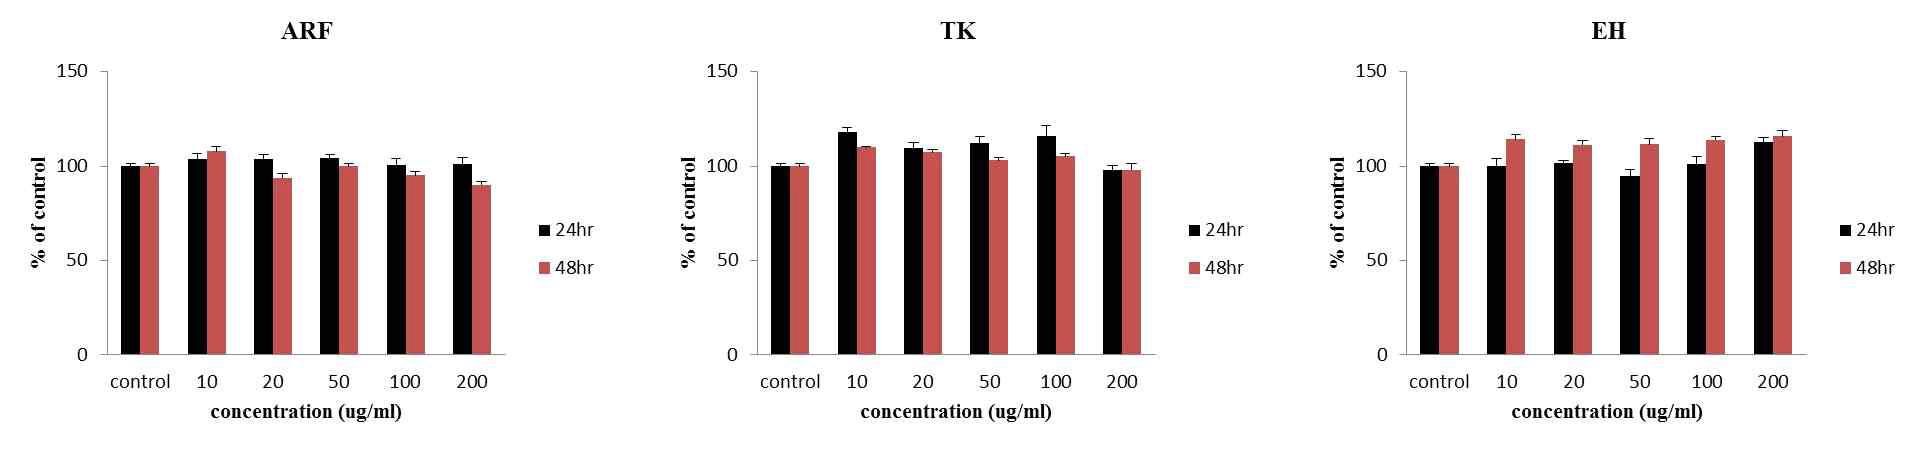 Effect of Cell Viability in HRMC induced by dose-dependent Oriental medicine(ARF, TK, EH)